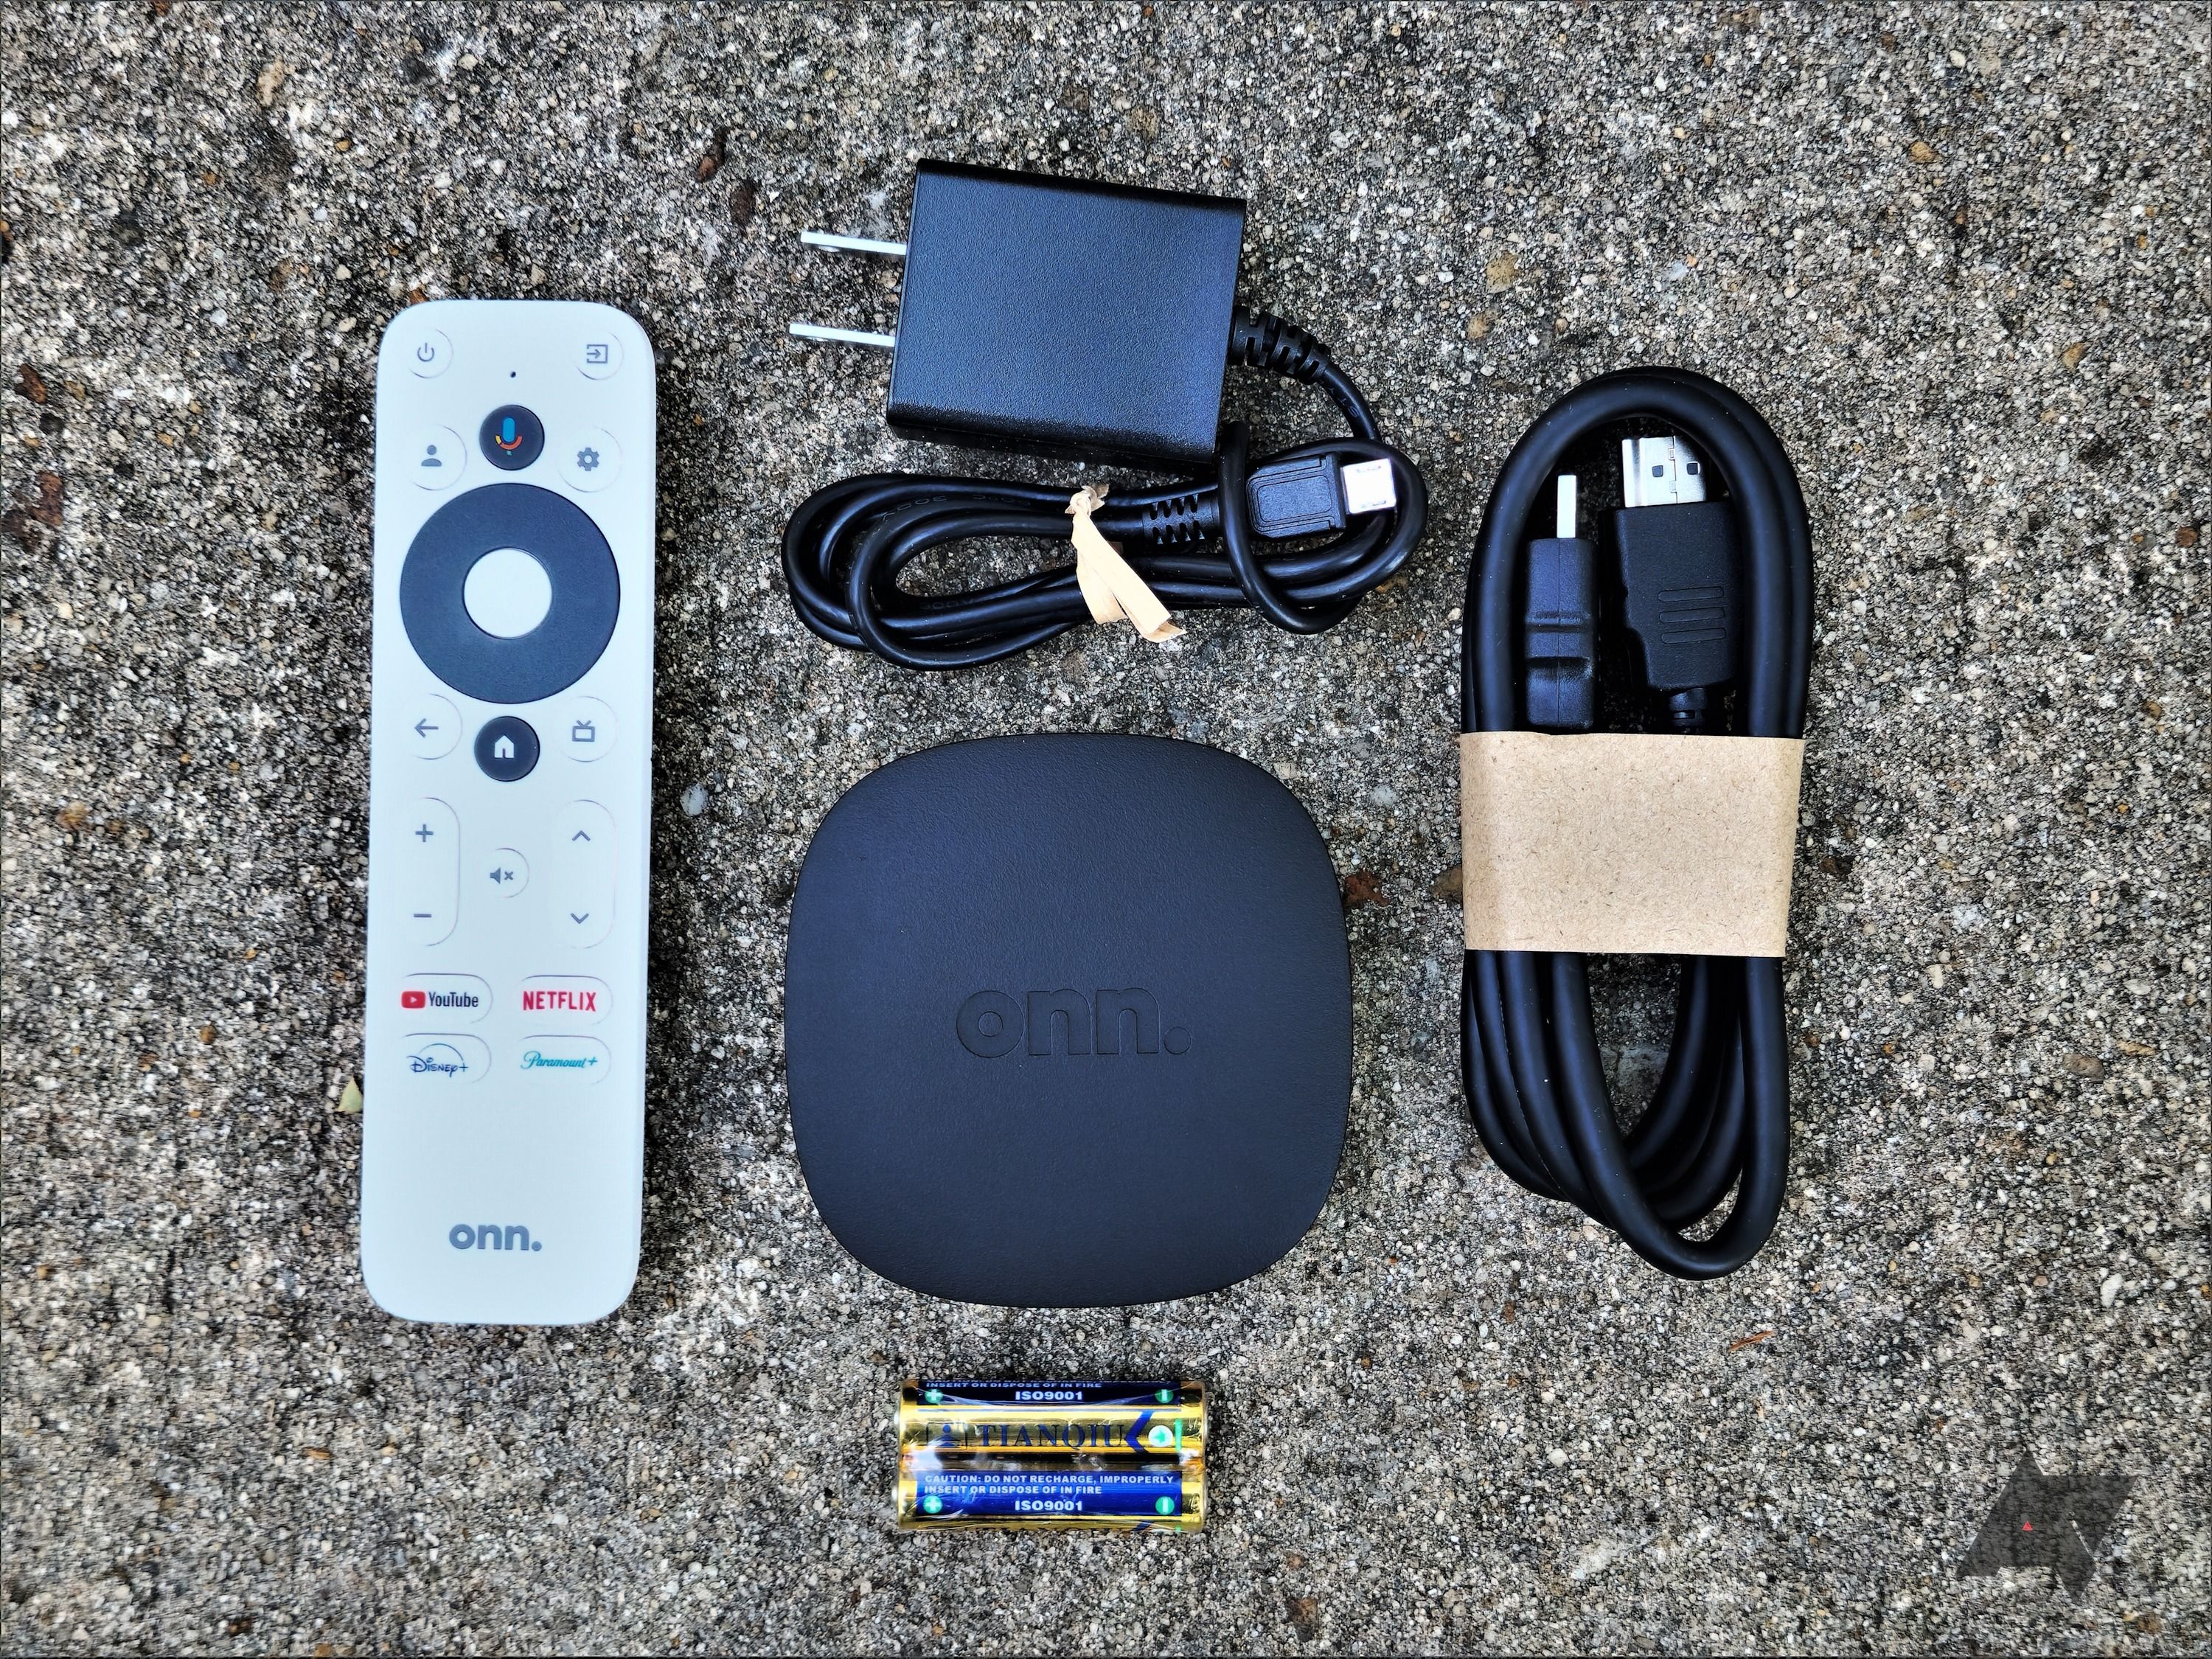 4K Ultra HD Android TV Box with Google Assistant Remote Streaming Media  Player Chromecast Built-in 8GB Storage